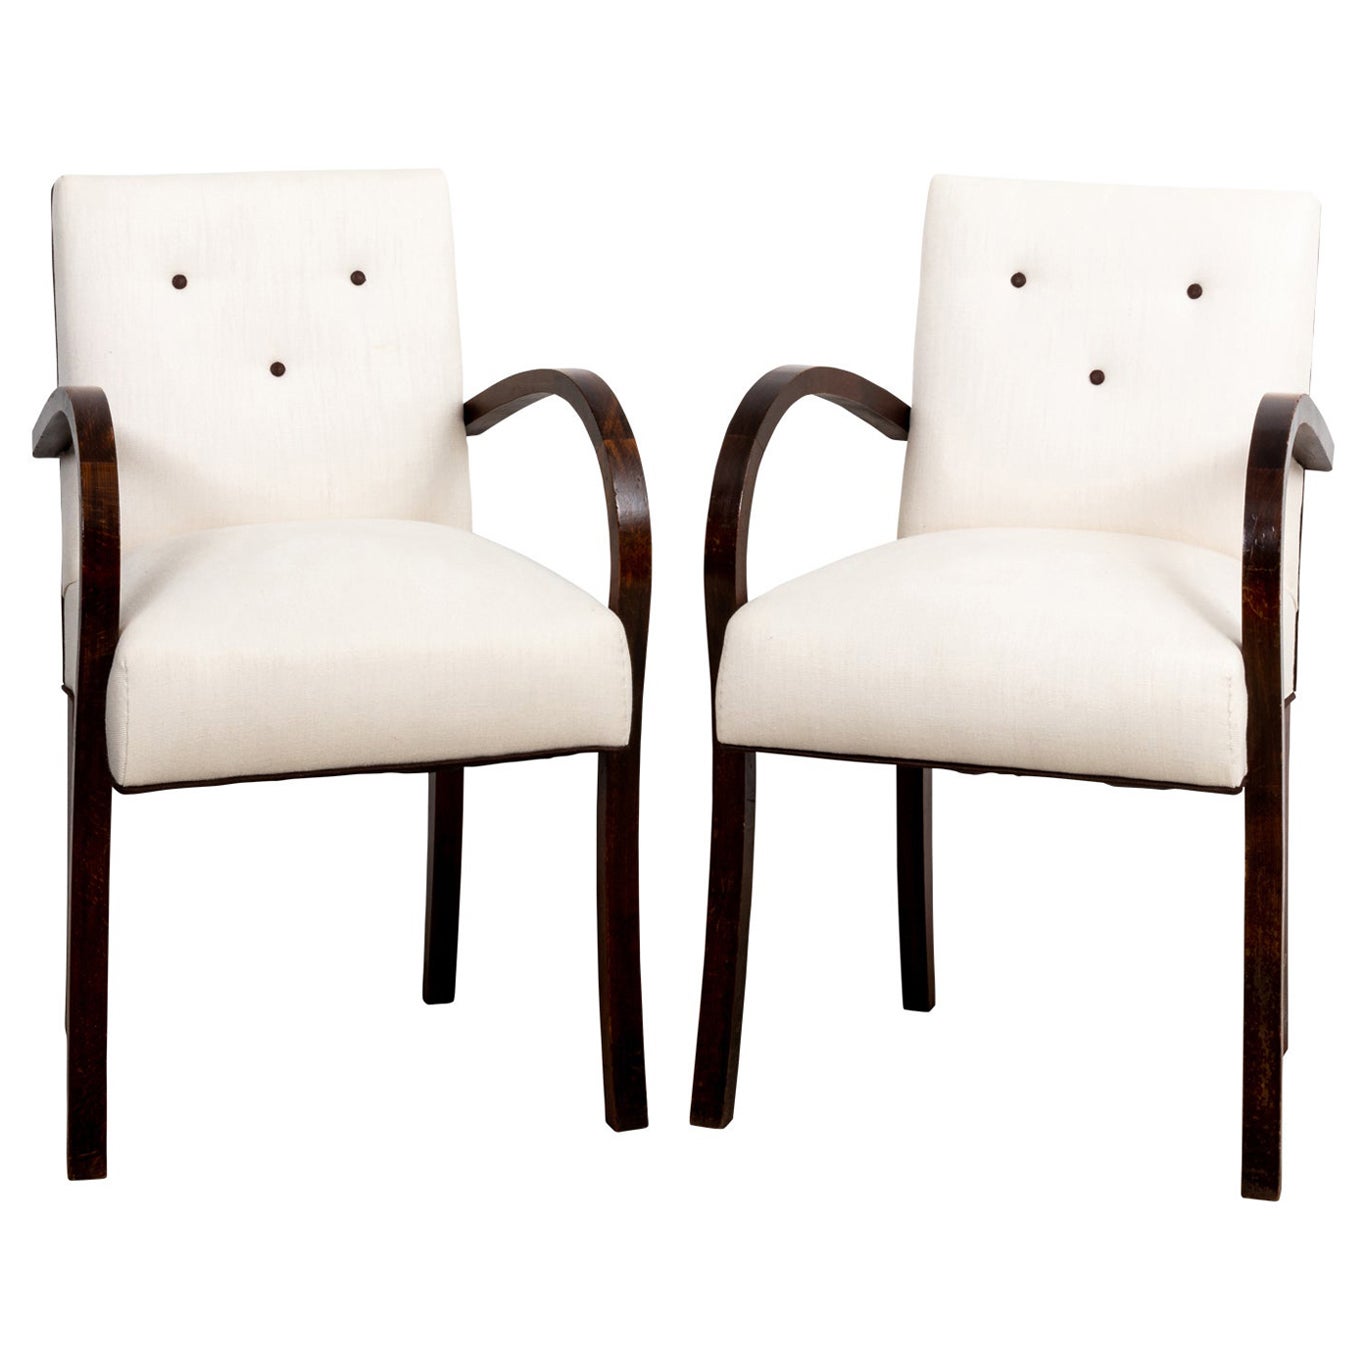 Pair of Bentwood Mid-Century Armchairs in Cream Linen Upholstery